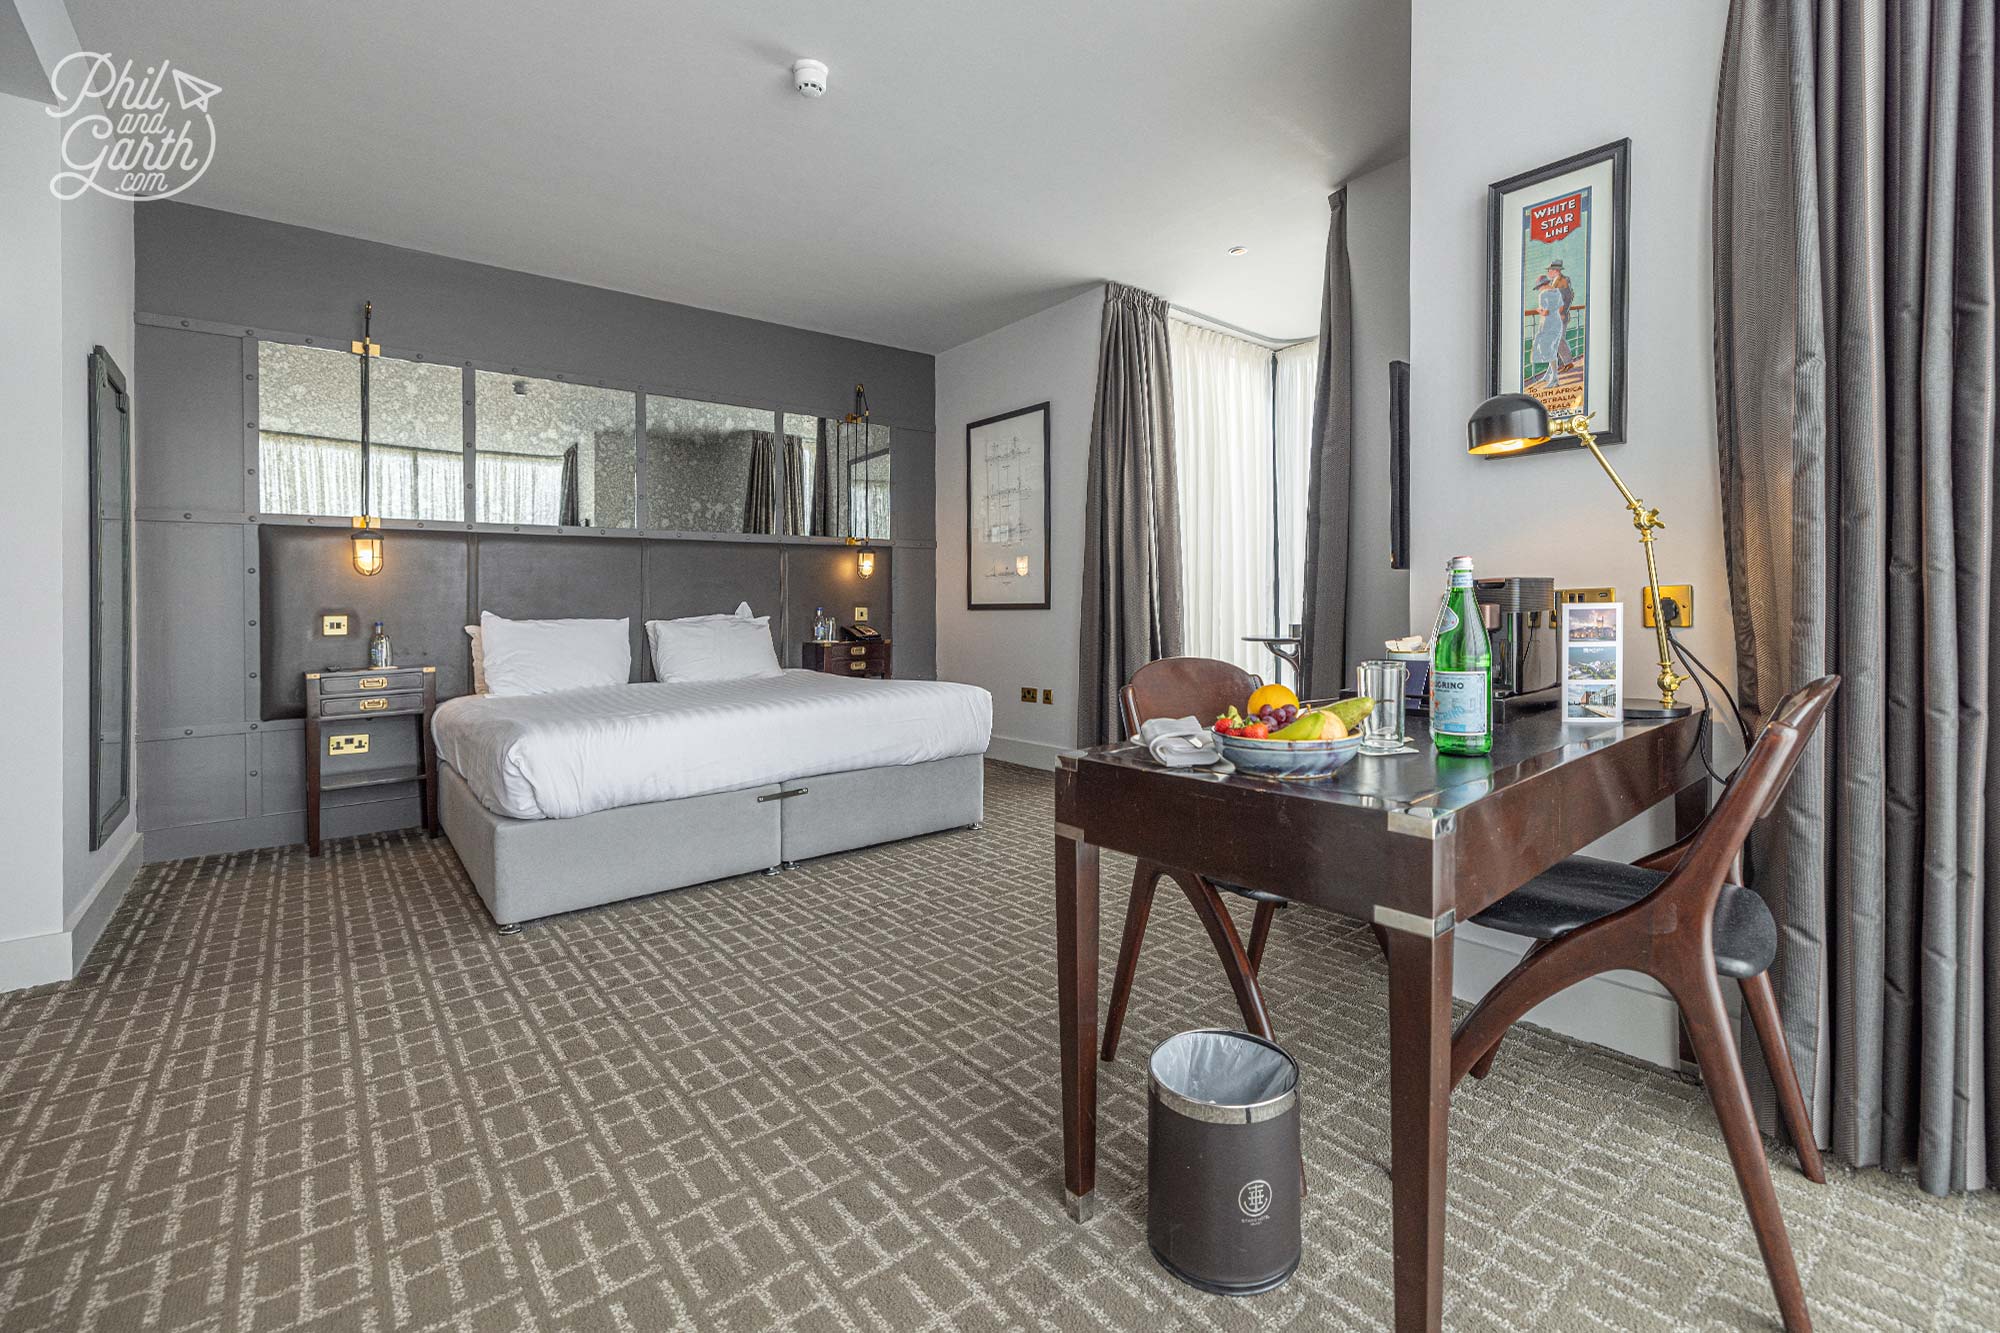 Executive Rooms are spacious, clean and nicely designed